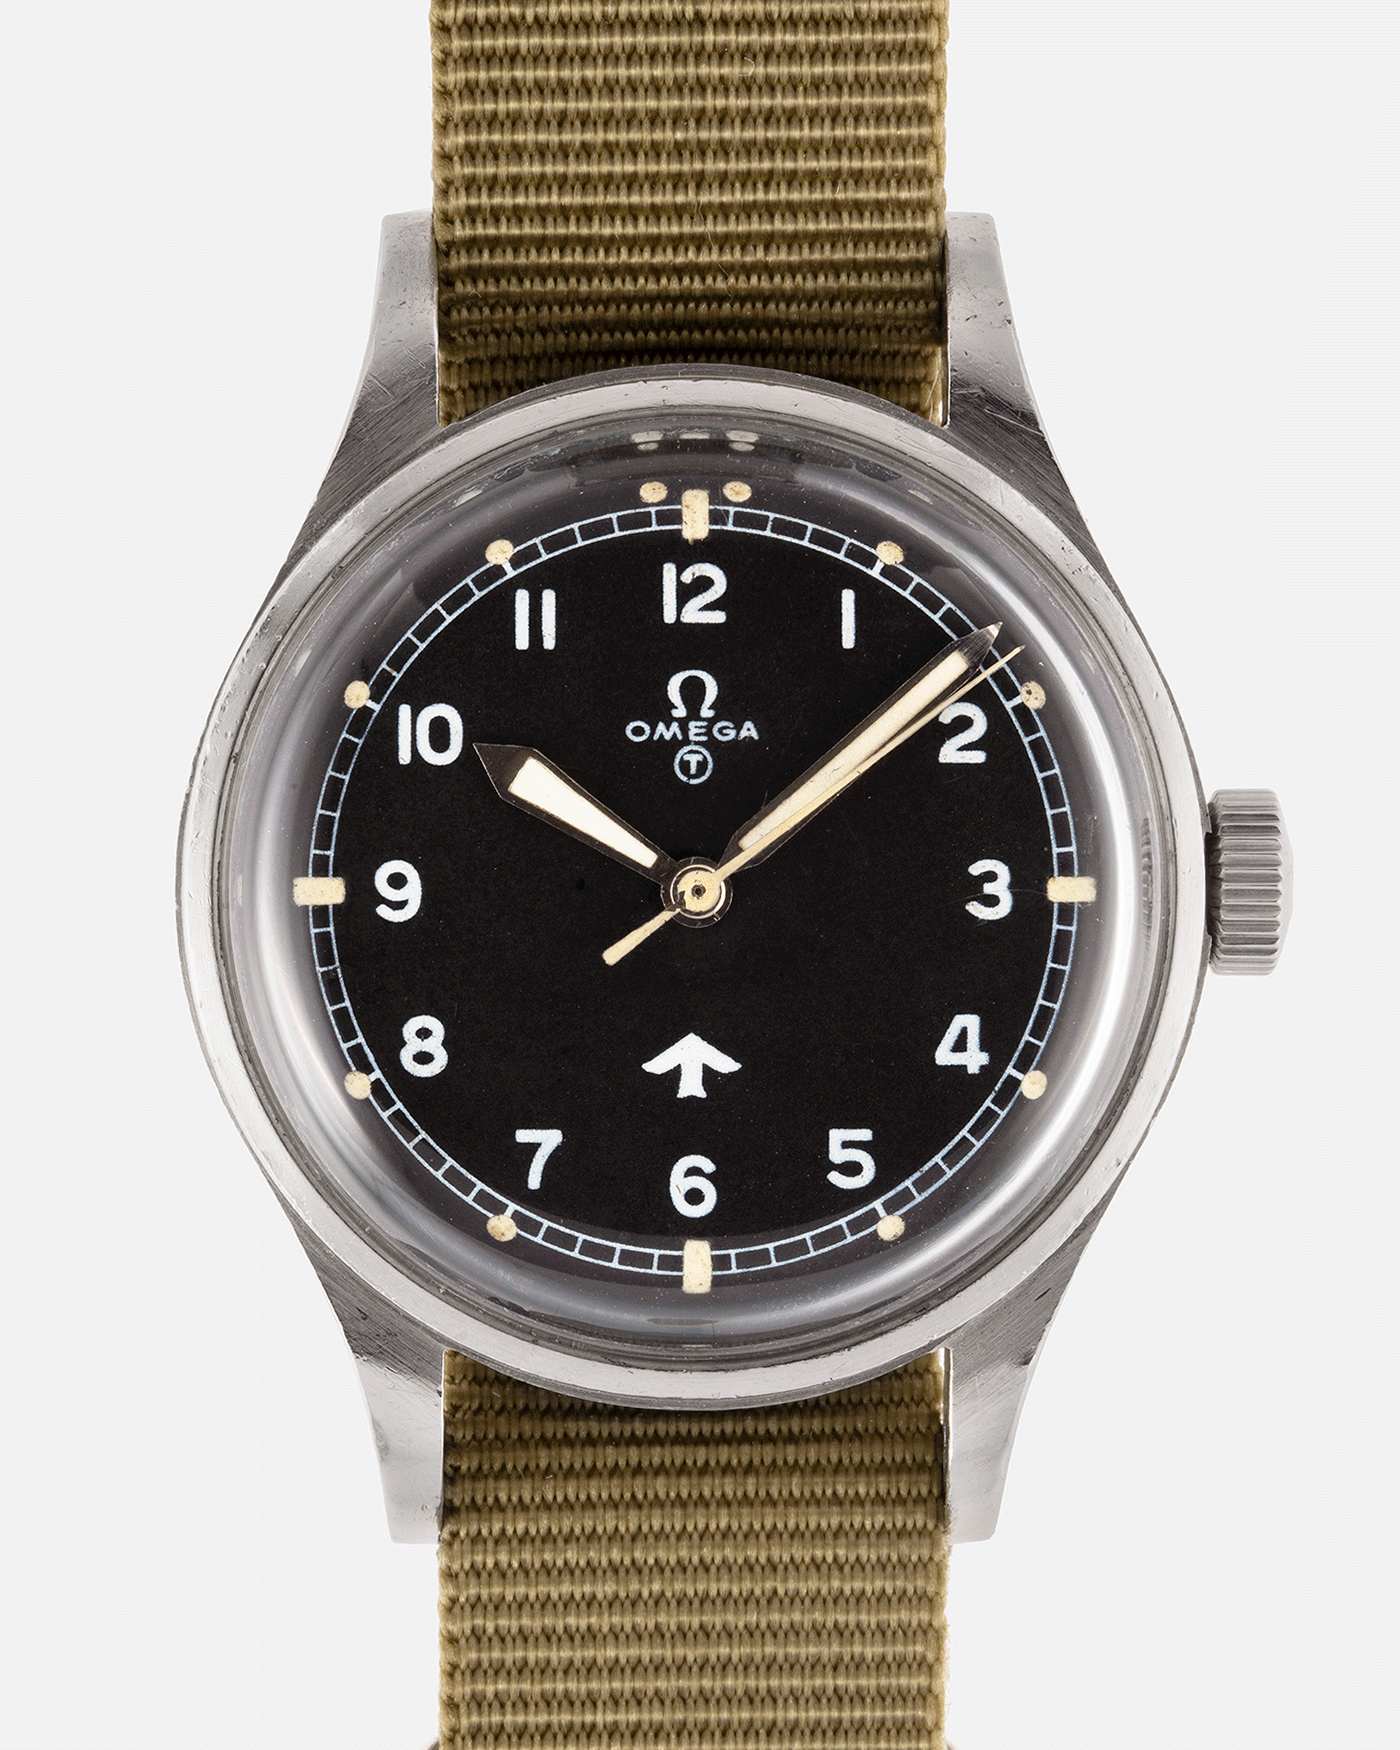 Brand: Omega Year: 1953 Model: Fat Arrow 53 Reference Number: CK 2777-1 Material: Stainless Steel Movement: ‘Specially Adjusted’ Cal. 283 Case Diameter: 37mm Lug Width: 18mm Bracelet/Strap: Green Fabric NATO